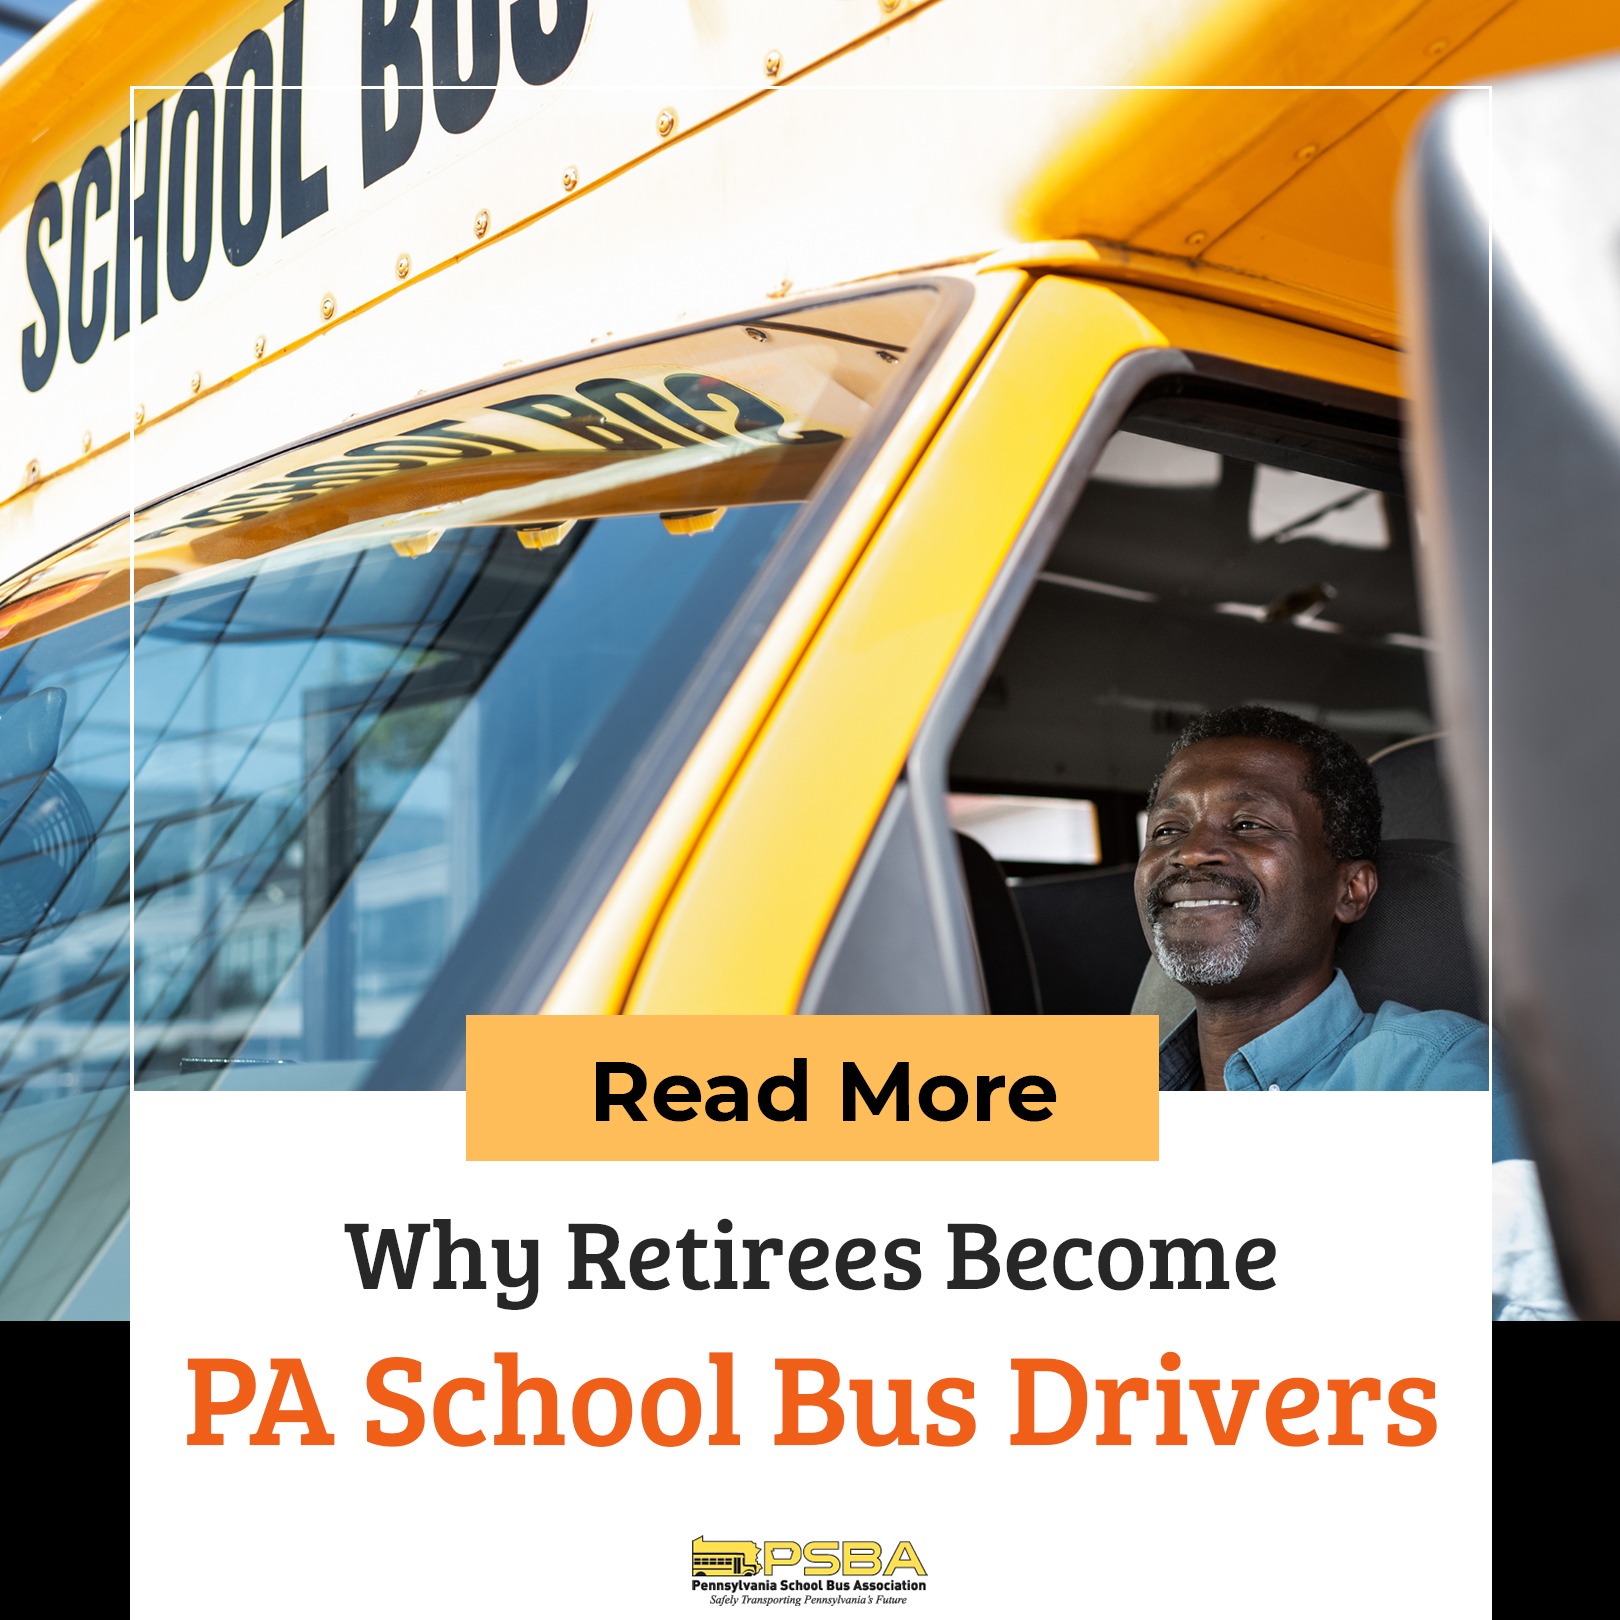 Why Retirees Become PA School Bus Drivers